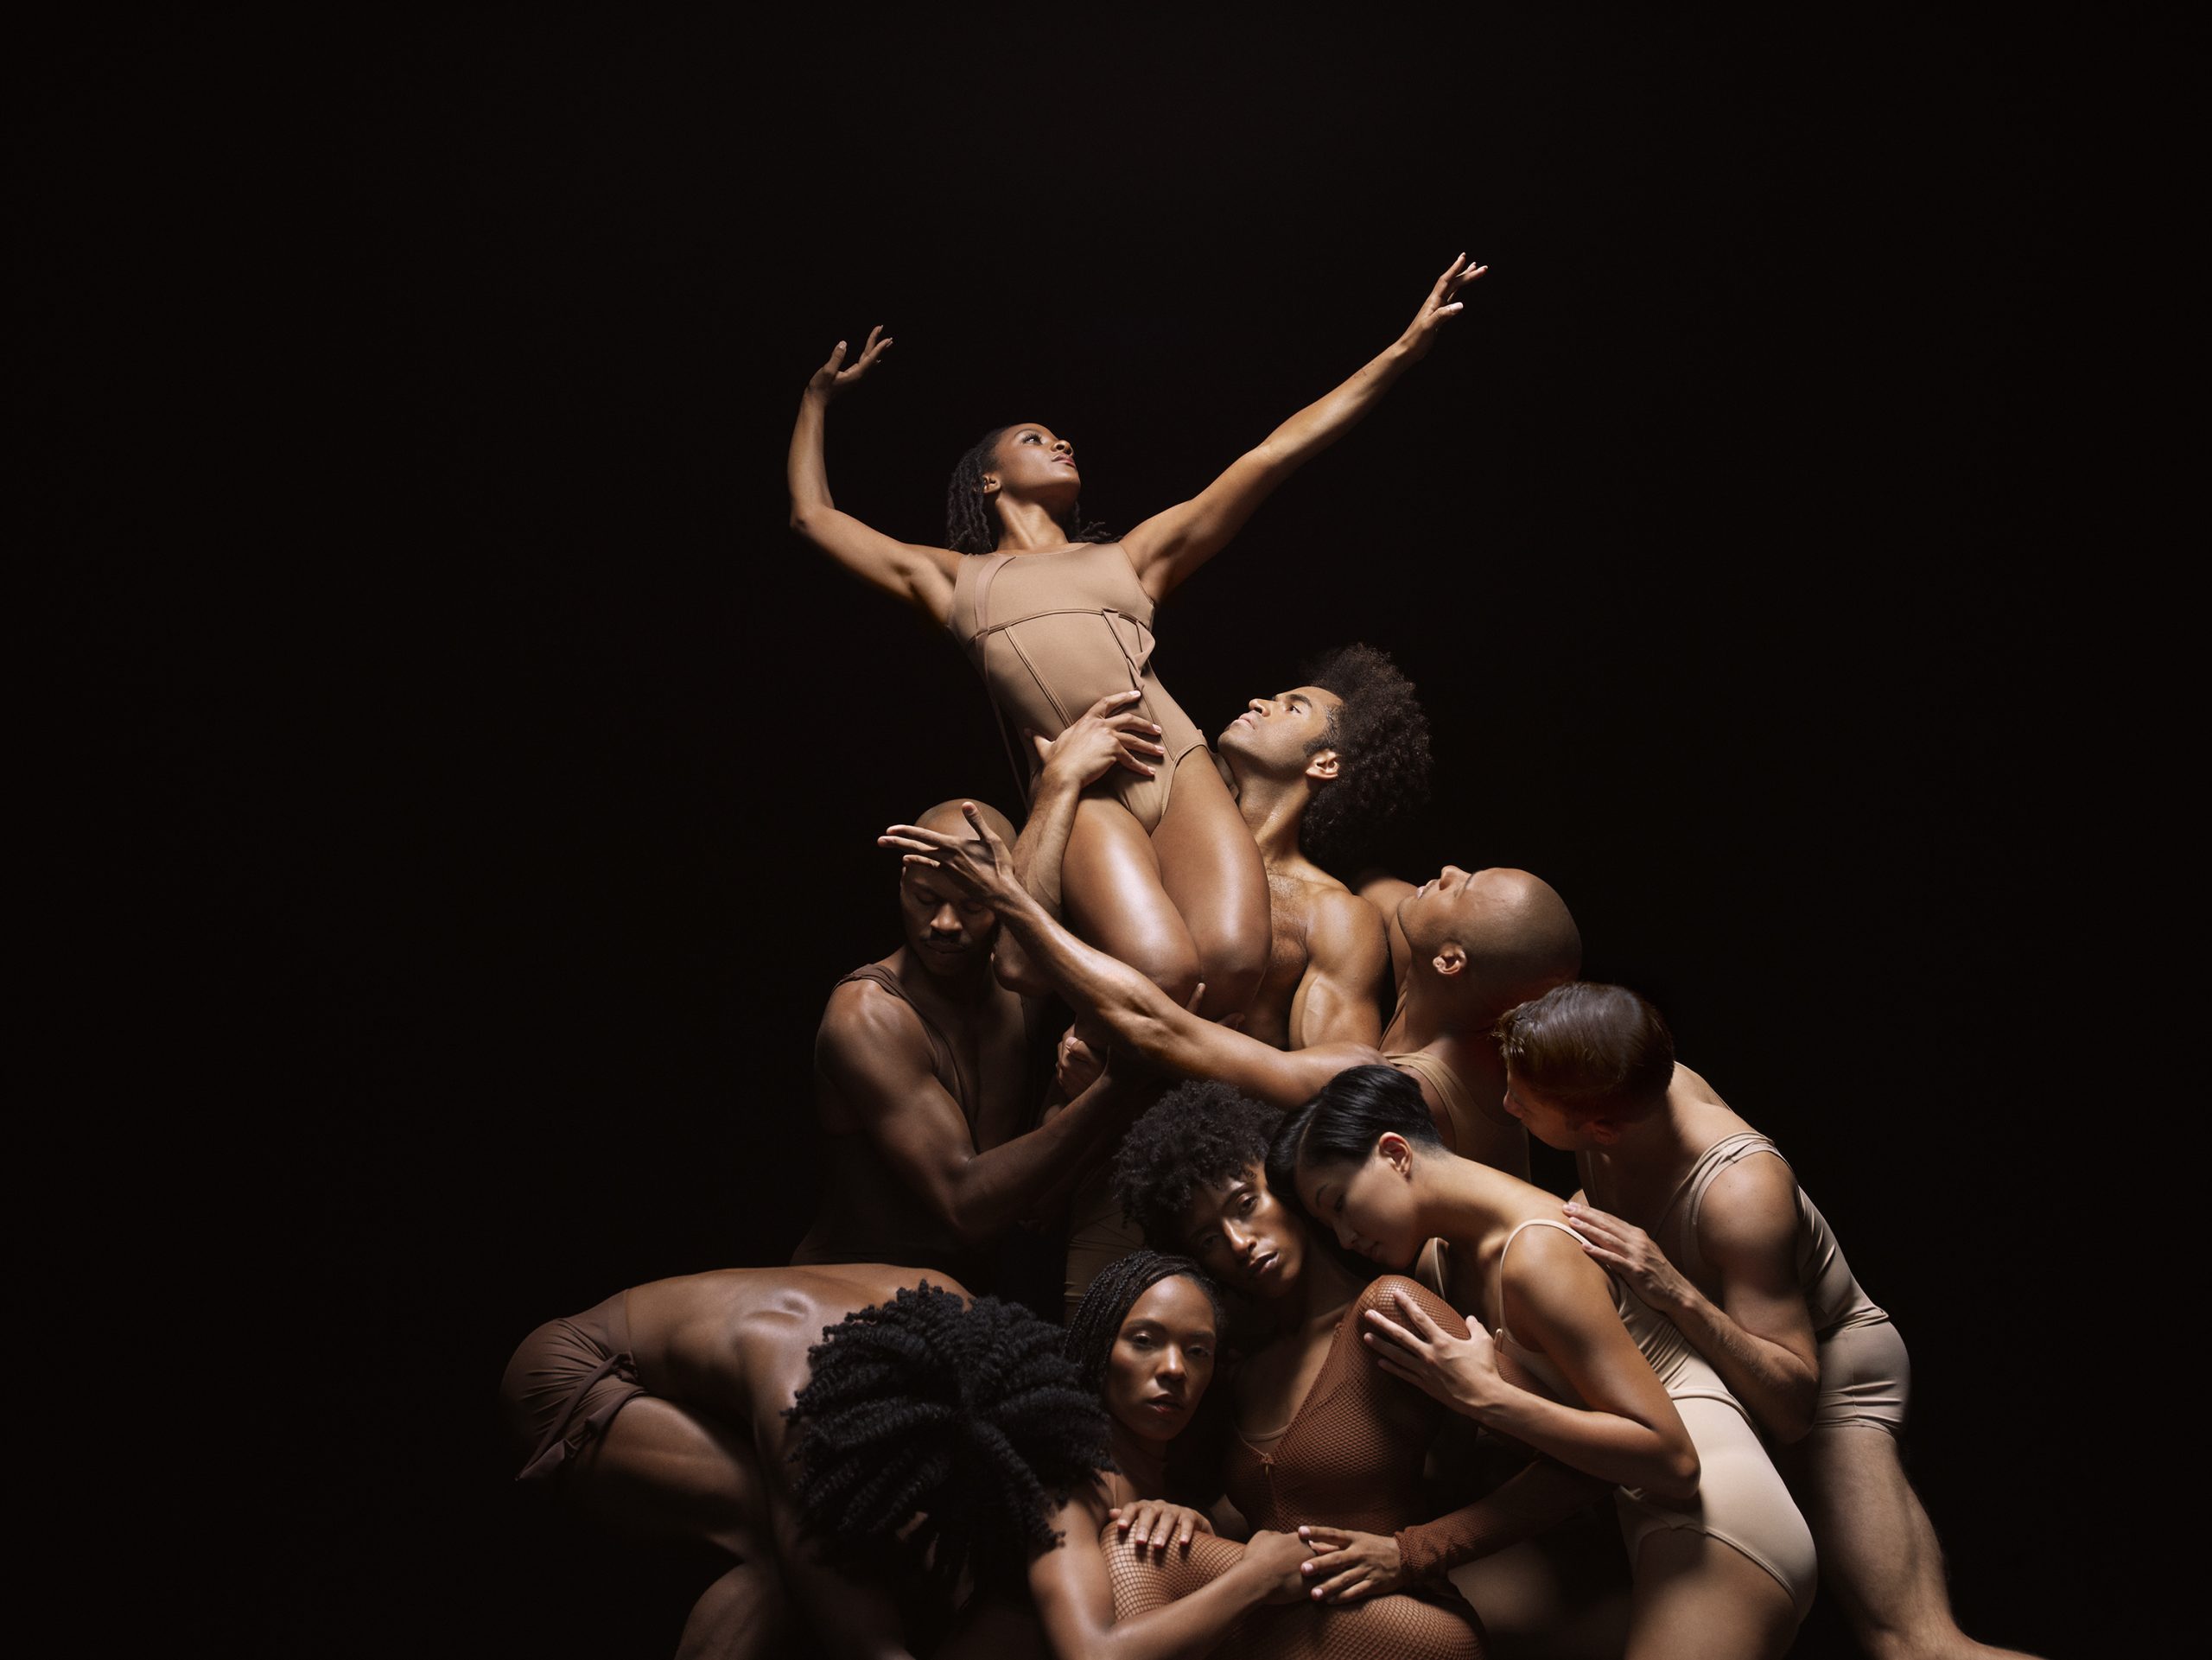 Dancers from Alvin Ailey American Dance Theater strike a dramatic pose.